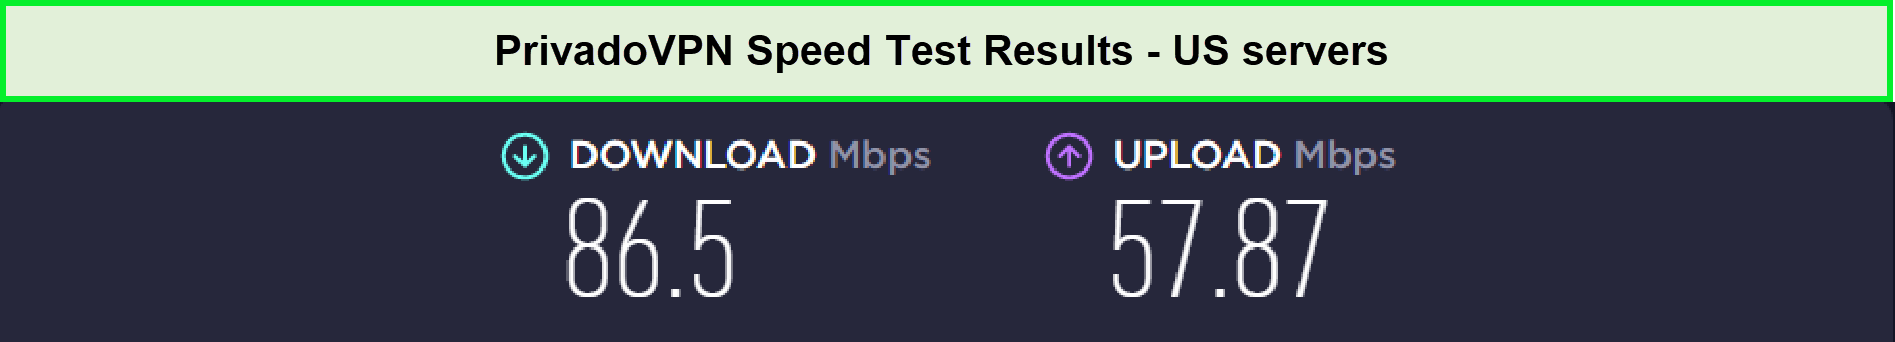 privadovpn-speed-tests-in-Spain